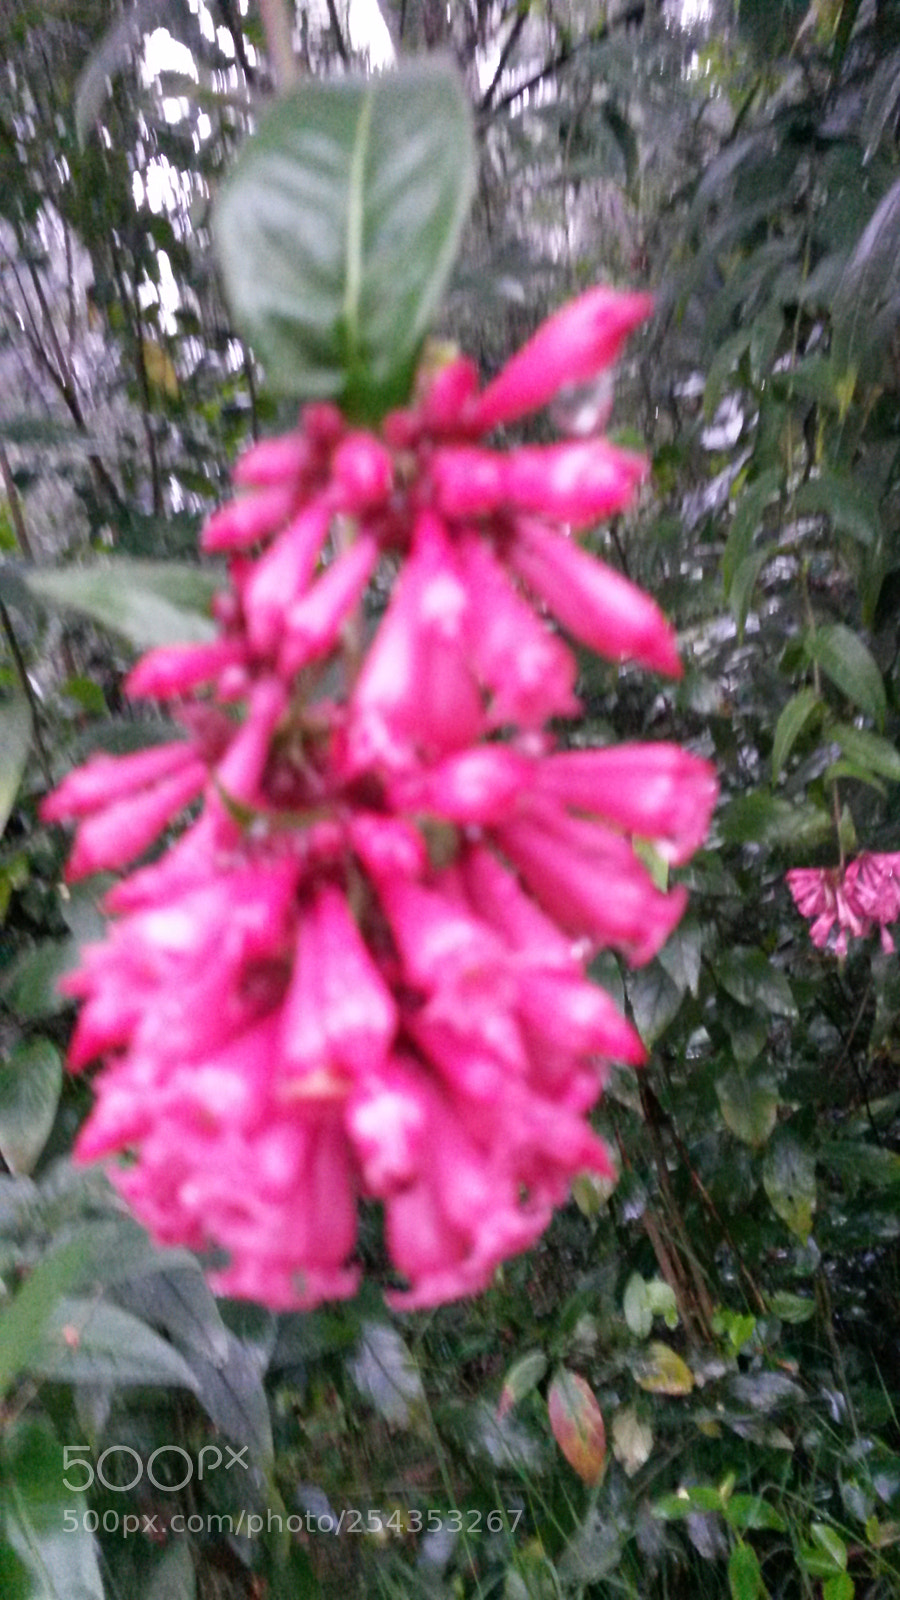 Samsung Galaxy S4 Mini sample photo. Cluster of tiny pink photography